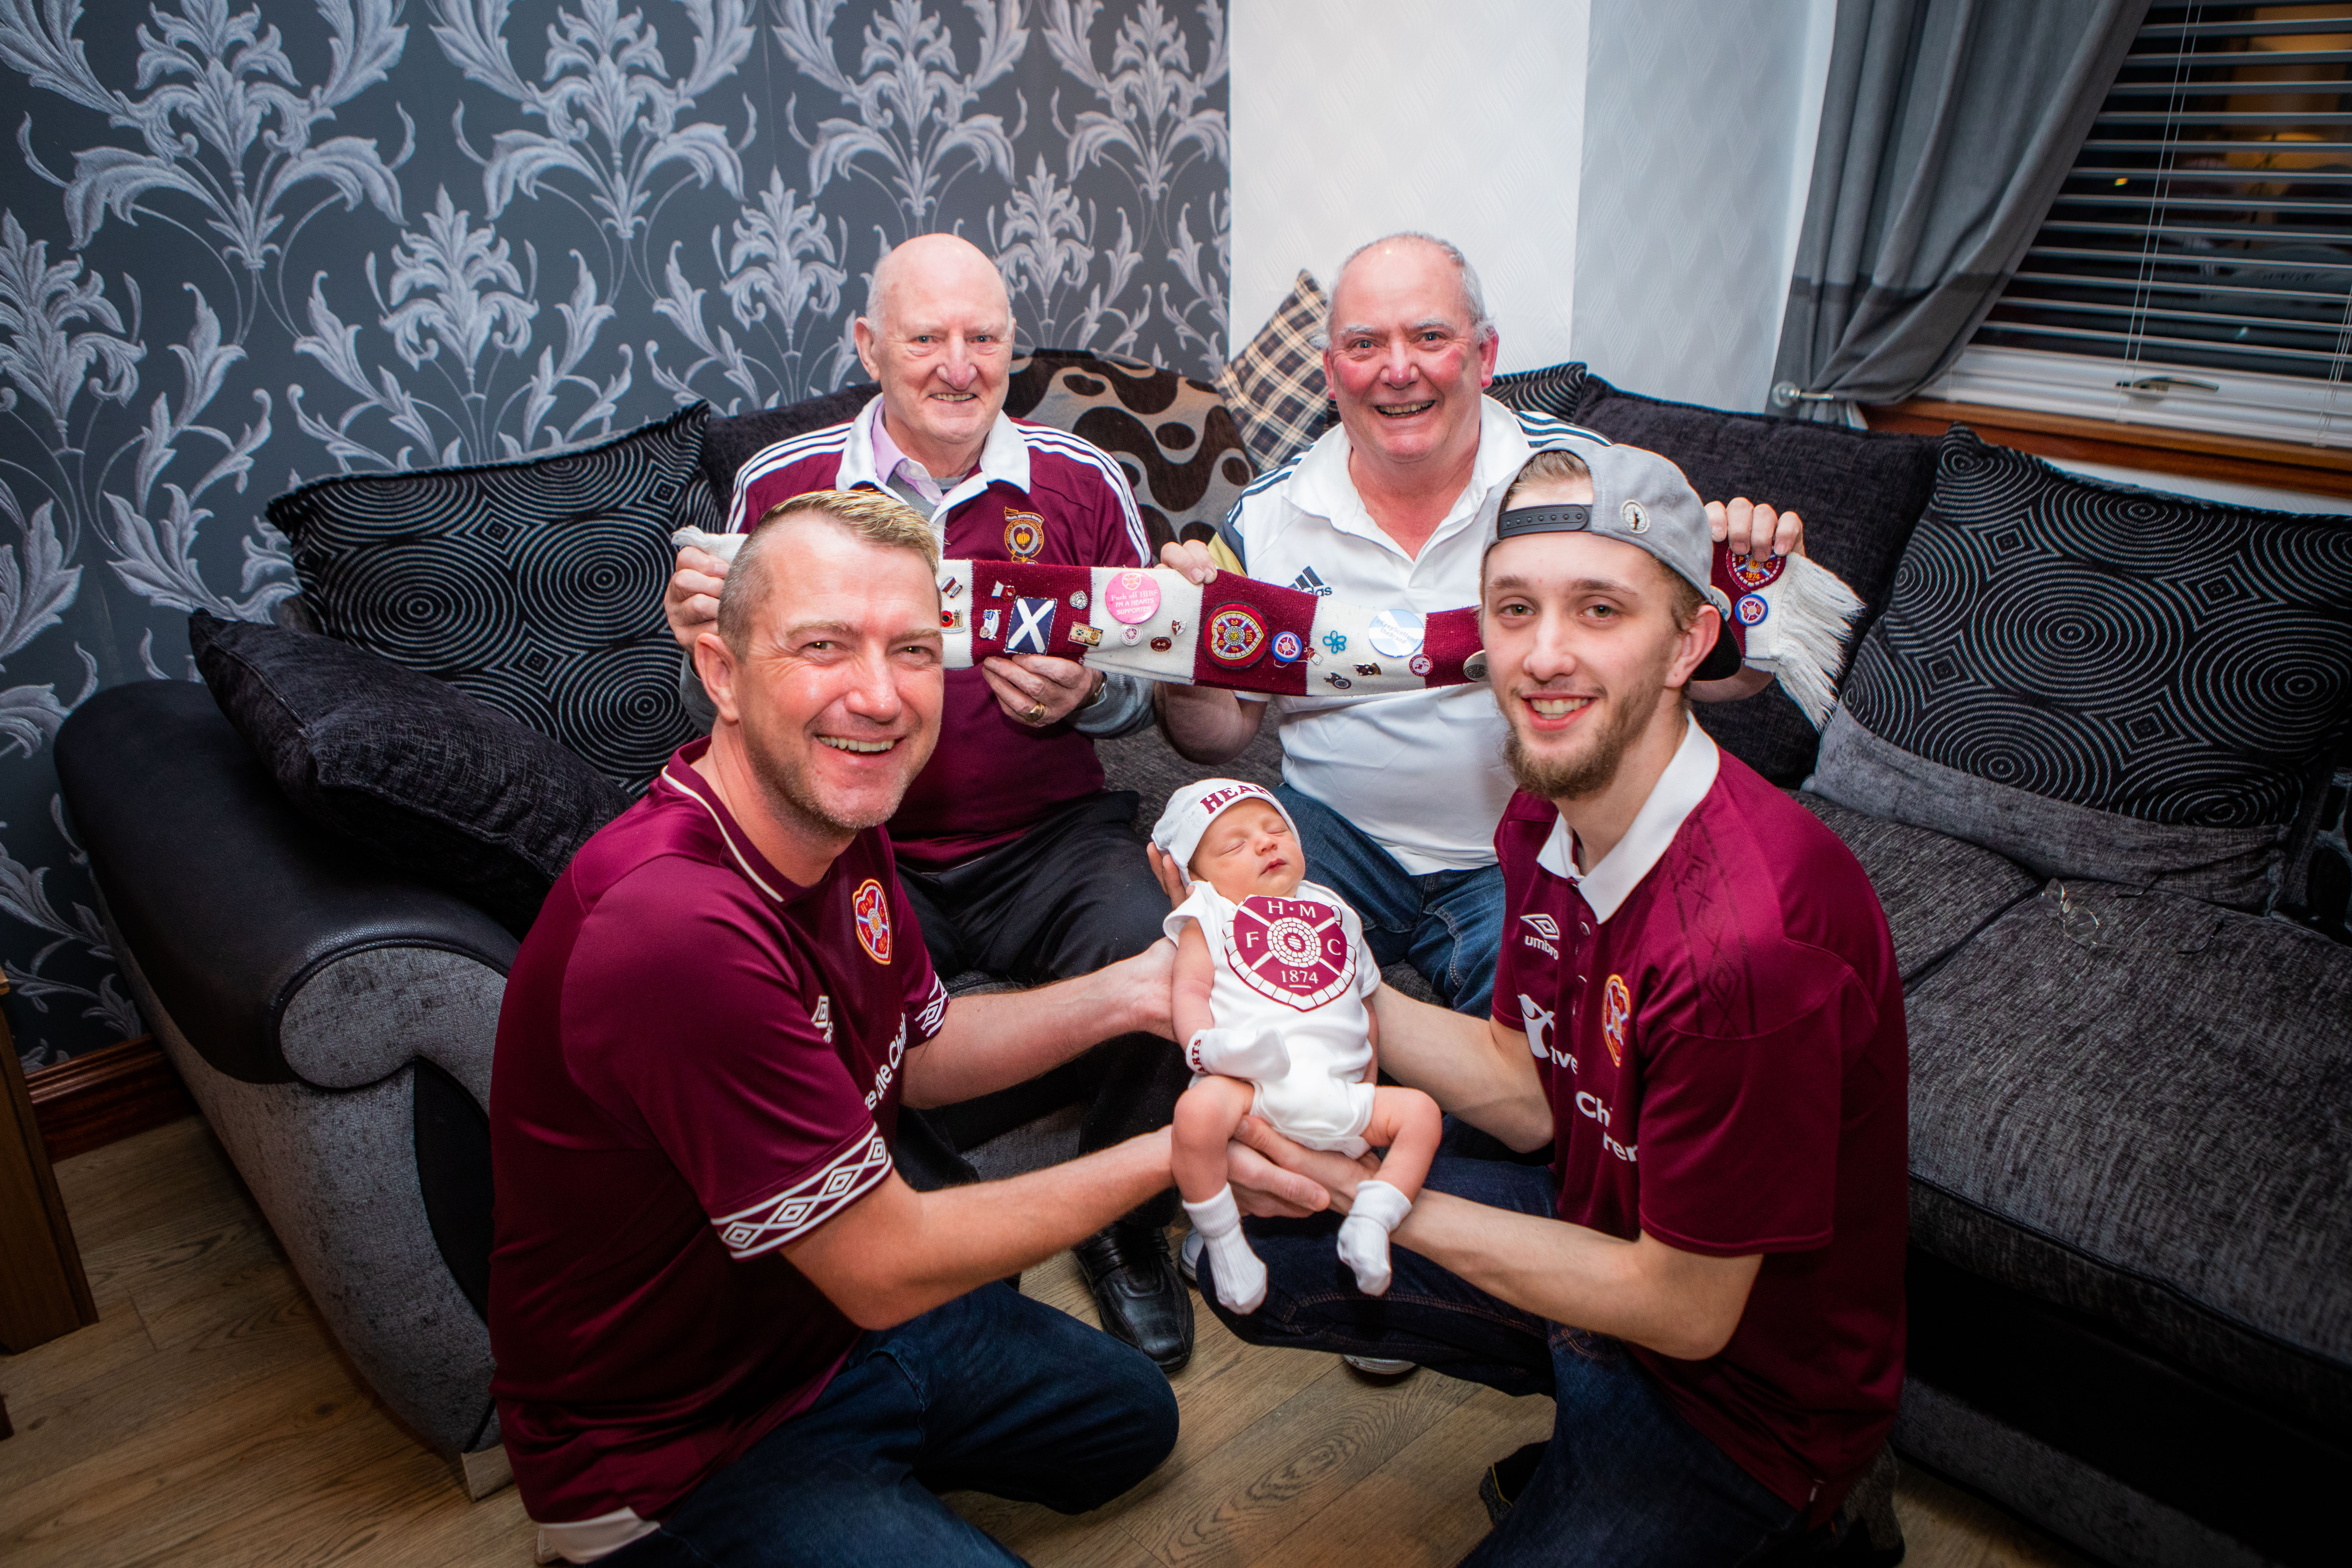 High five - Baby RJ, being held by dad Titch Jr (right), grandad Titch (left) and great grandad Ricky (back right) and great great grandad Dick (back left)